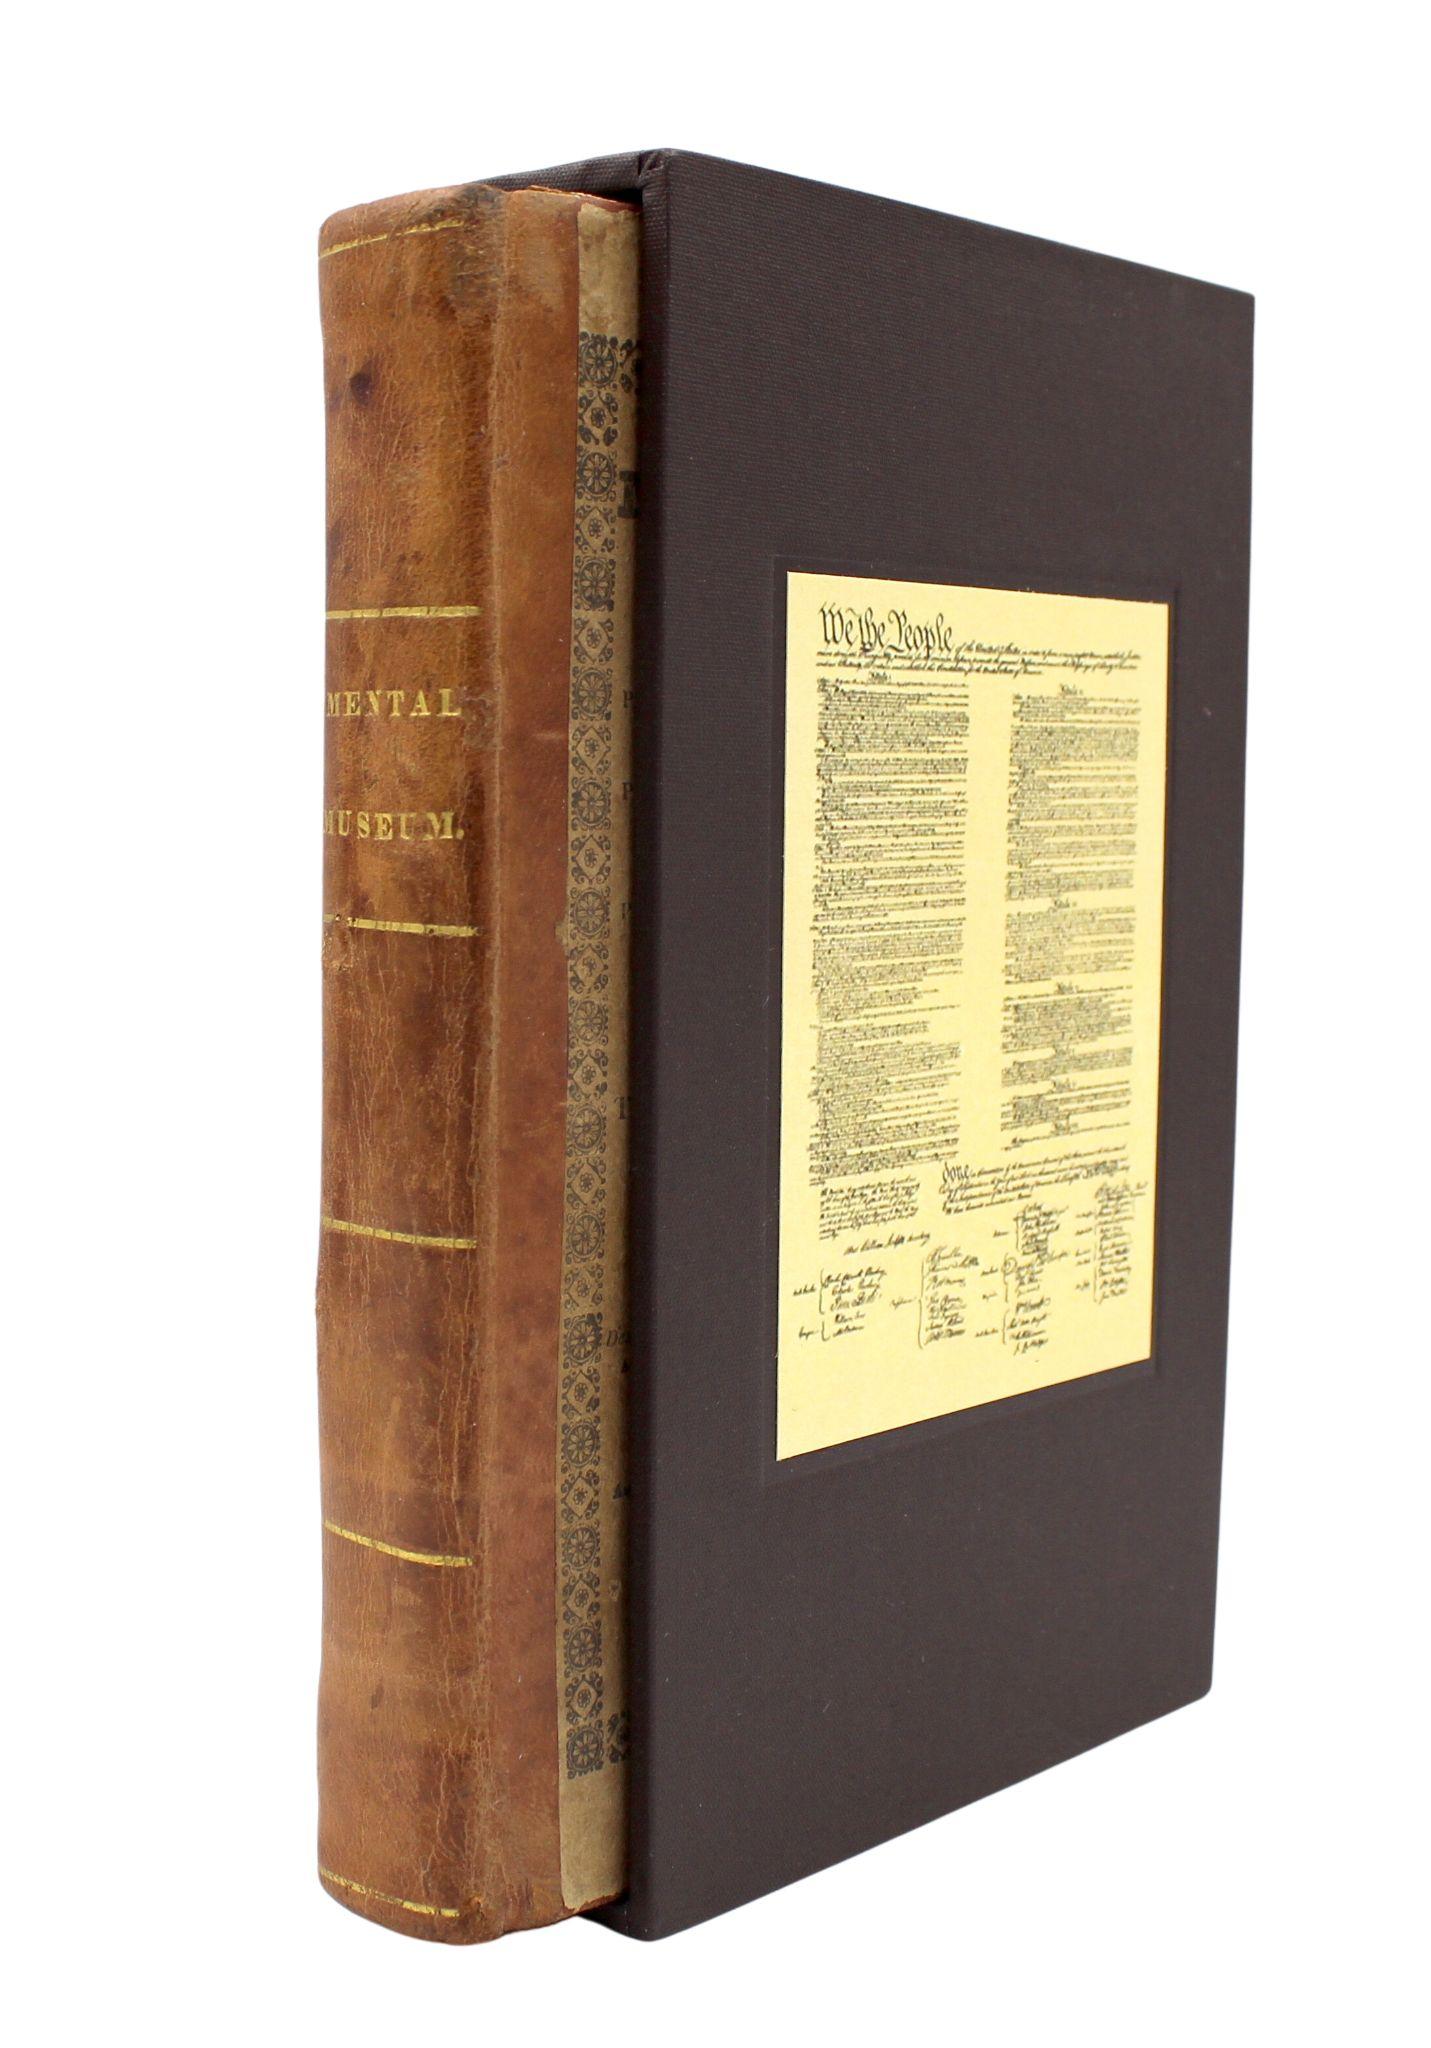 Torrey, Jr. Jesse. A Mental Museum for the Rising Generation. With an Appendix, Containing the Declaration of Independence, Constitution of the United States, and the Constitution of the First Free Circulating Library &c. : Designed for the Middle